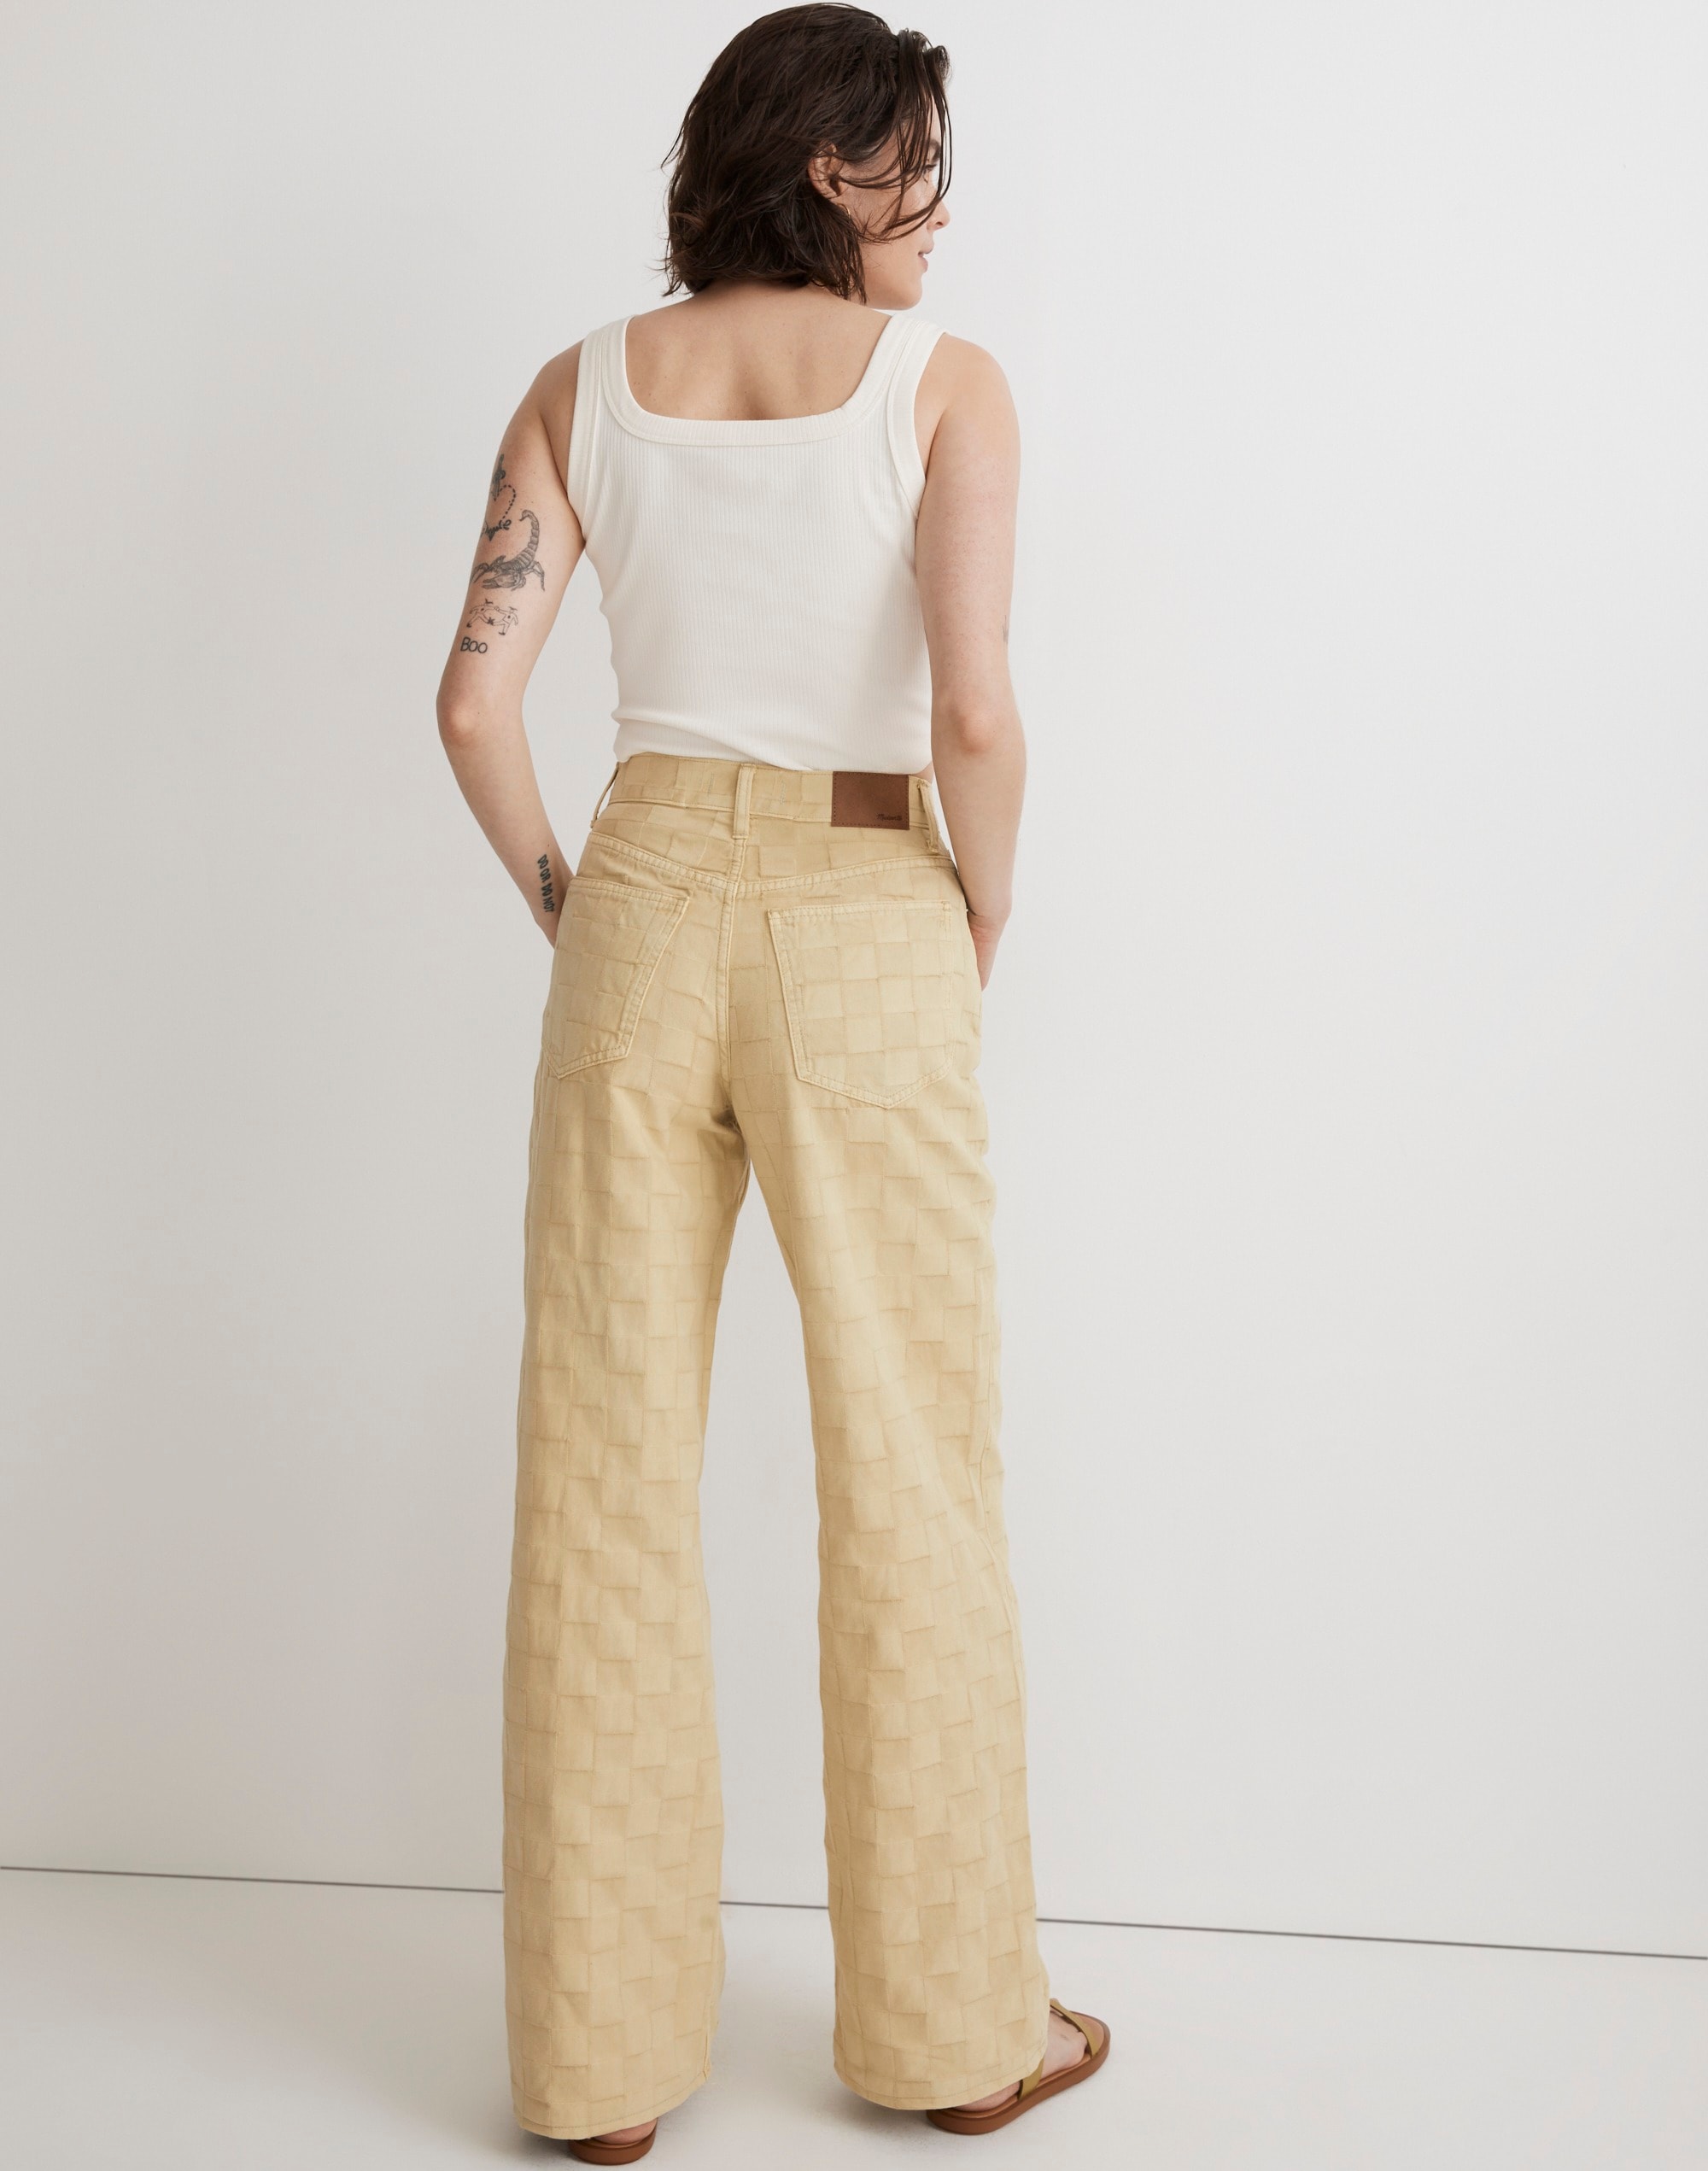 Superwide-Leg Jeans in Checkerboard Jacquard